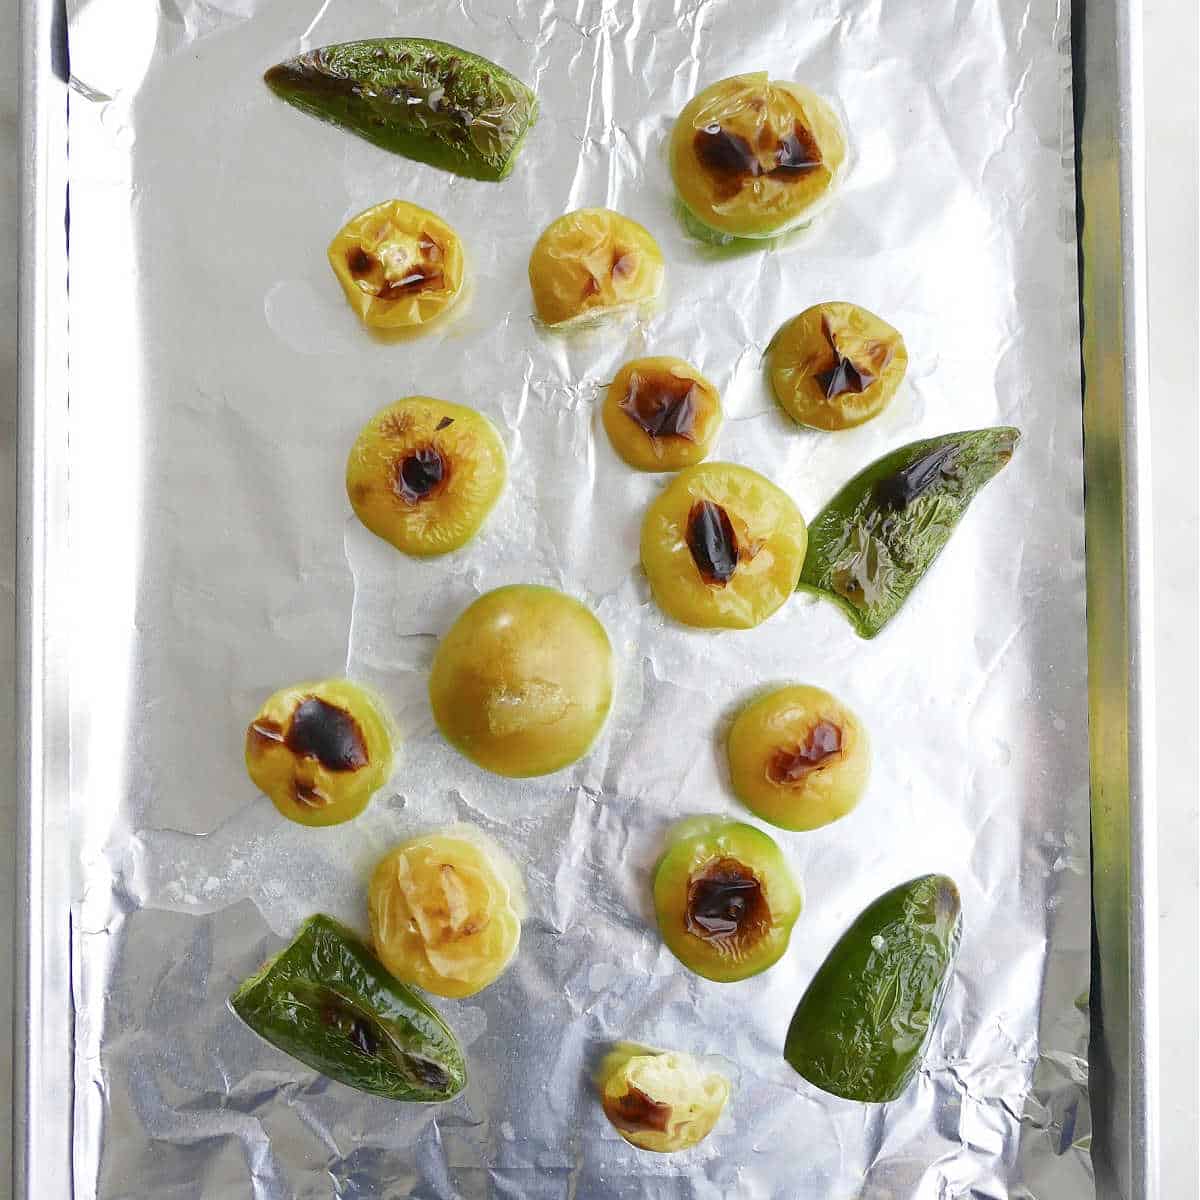 roasted tomatoes and jalapenos on a baking sheet lined with foil